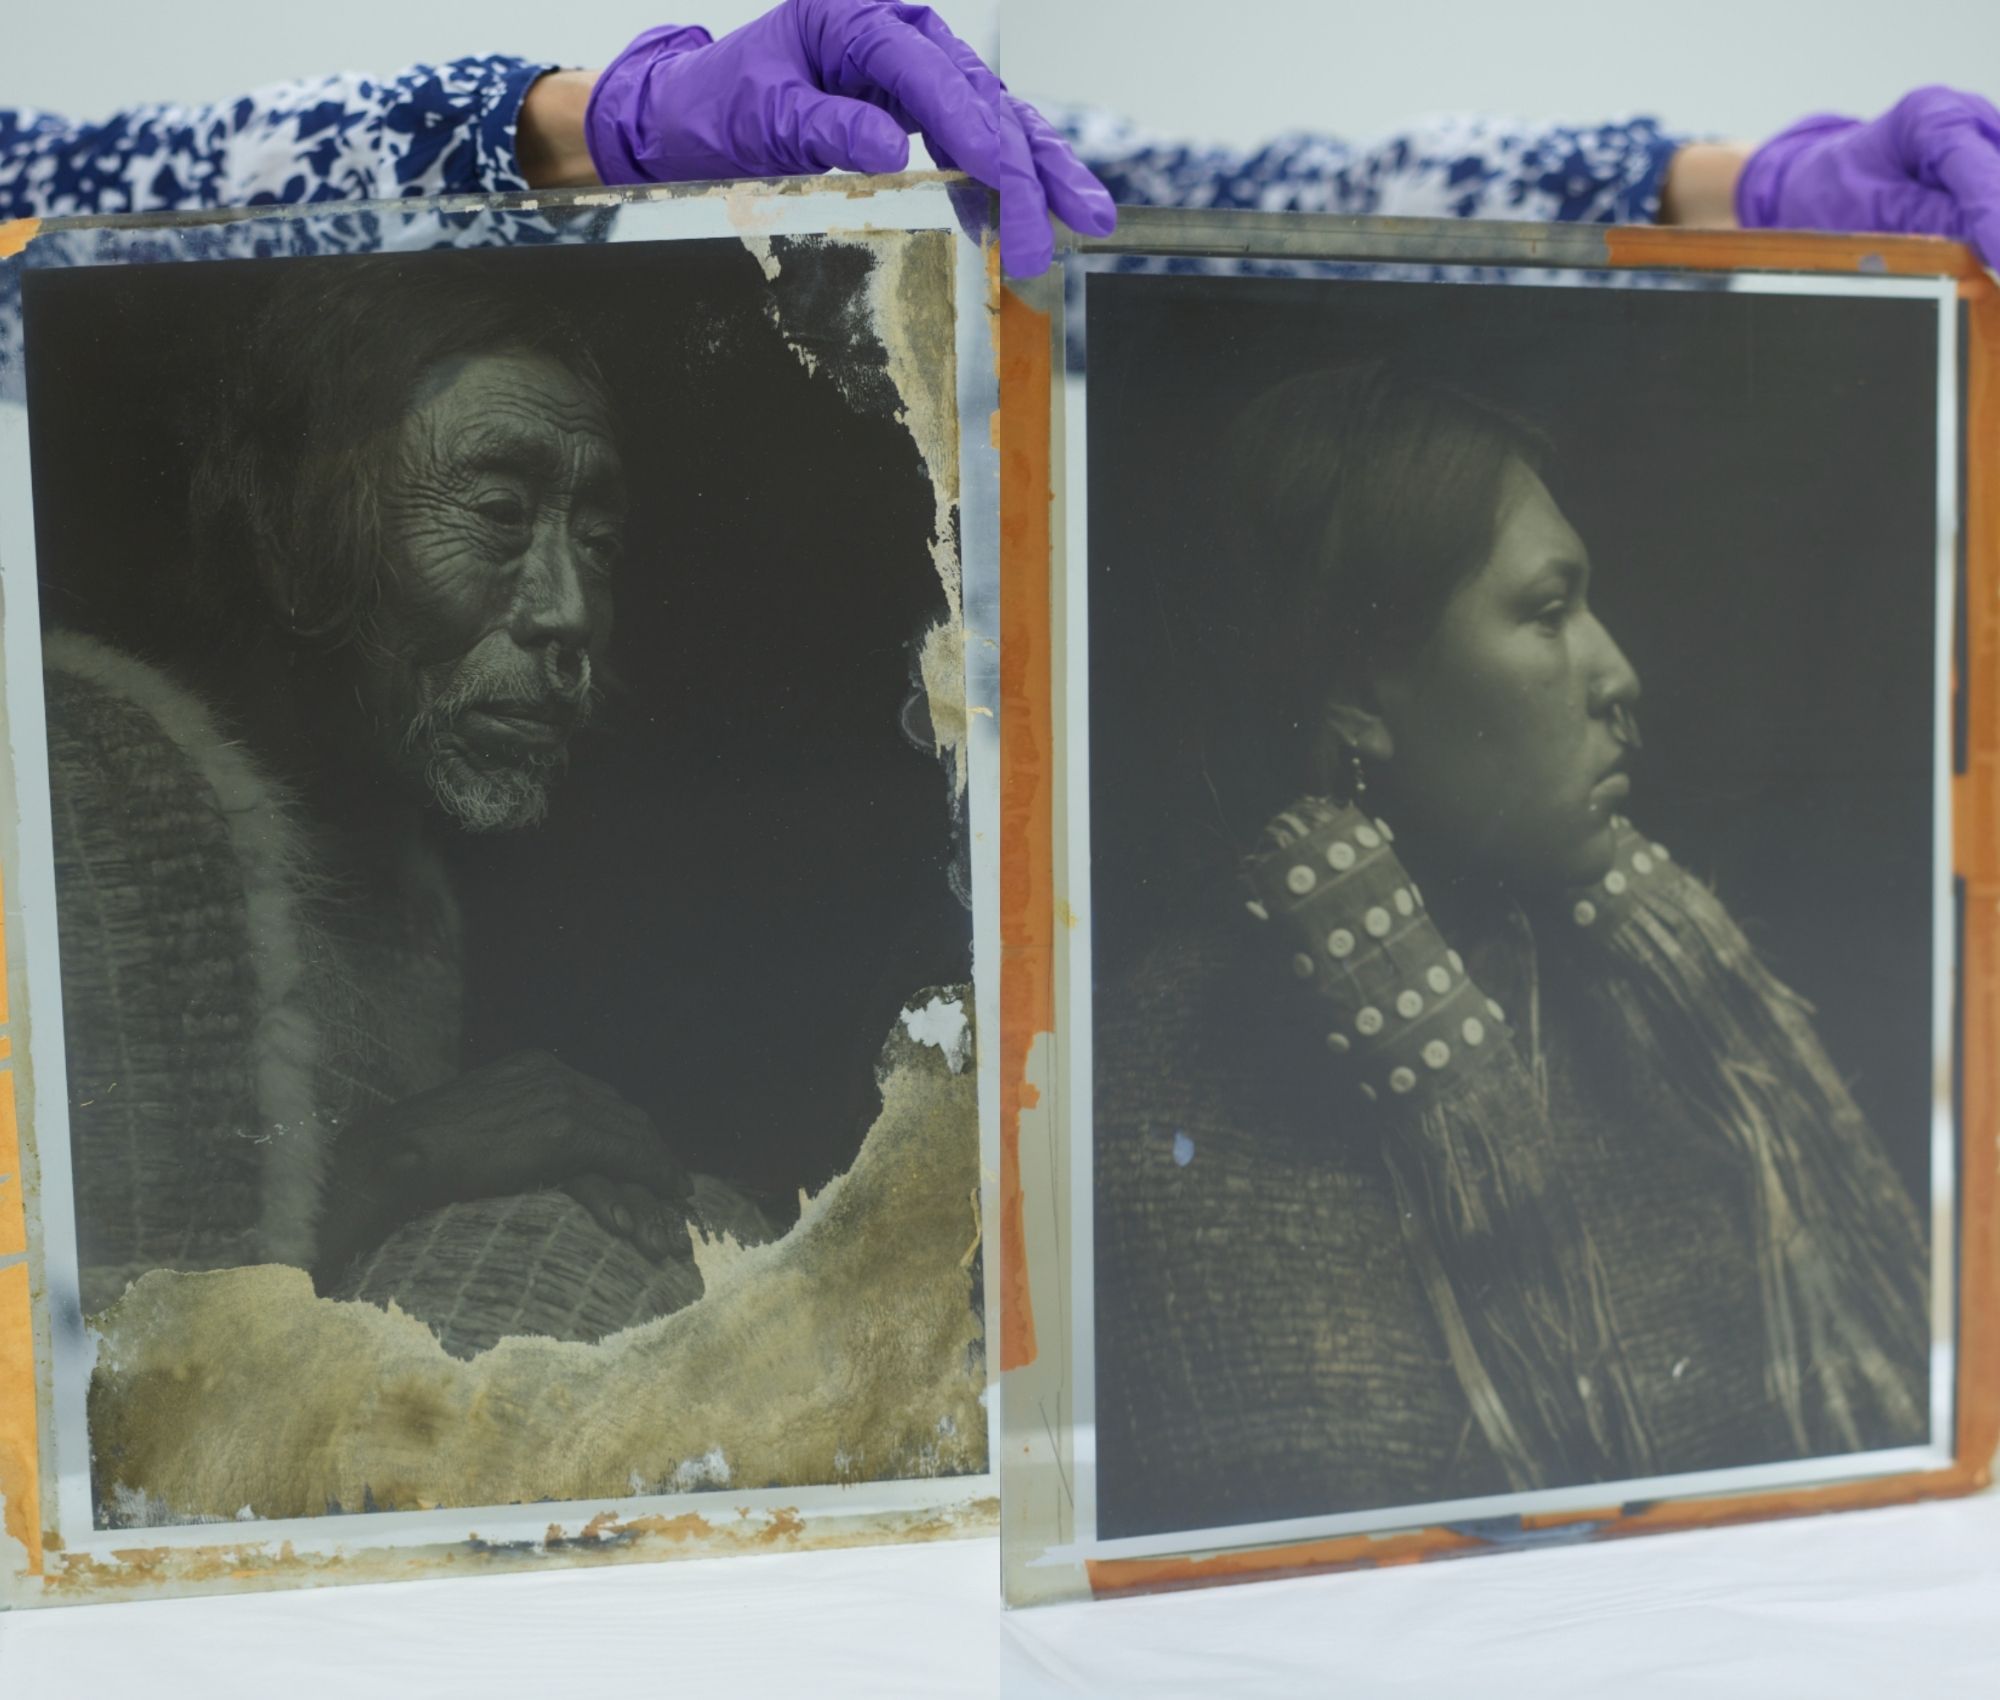 Two photographs of Indigenous people side-by-side